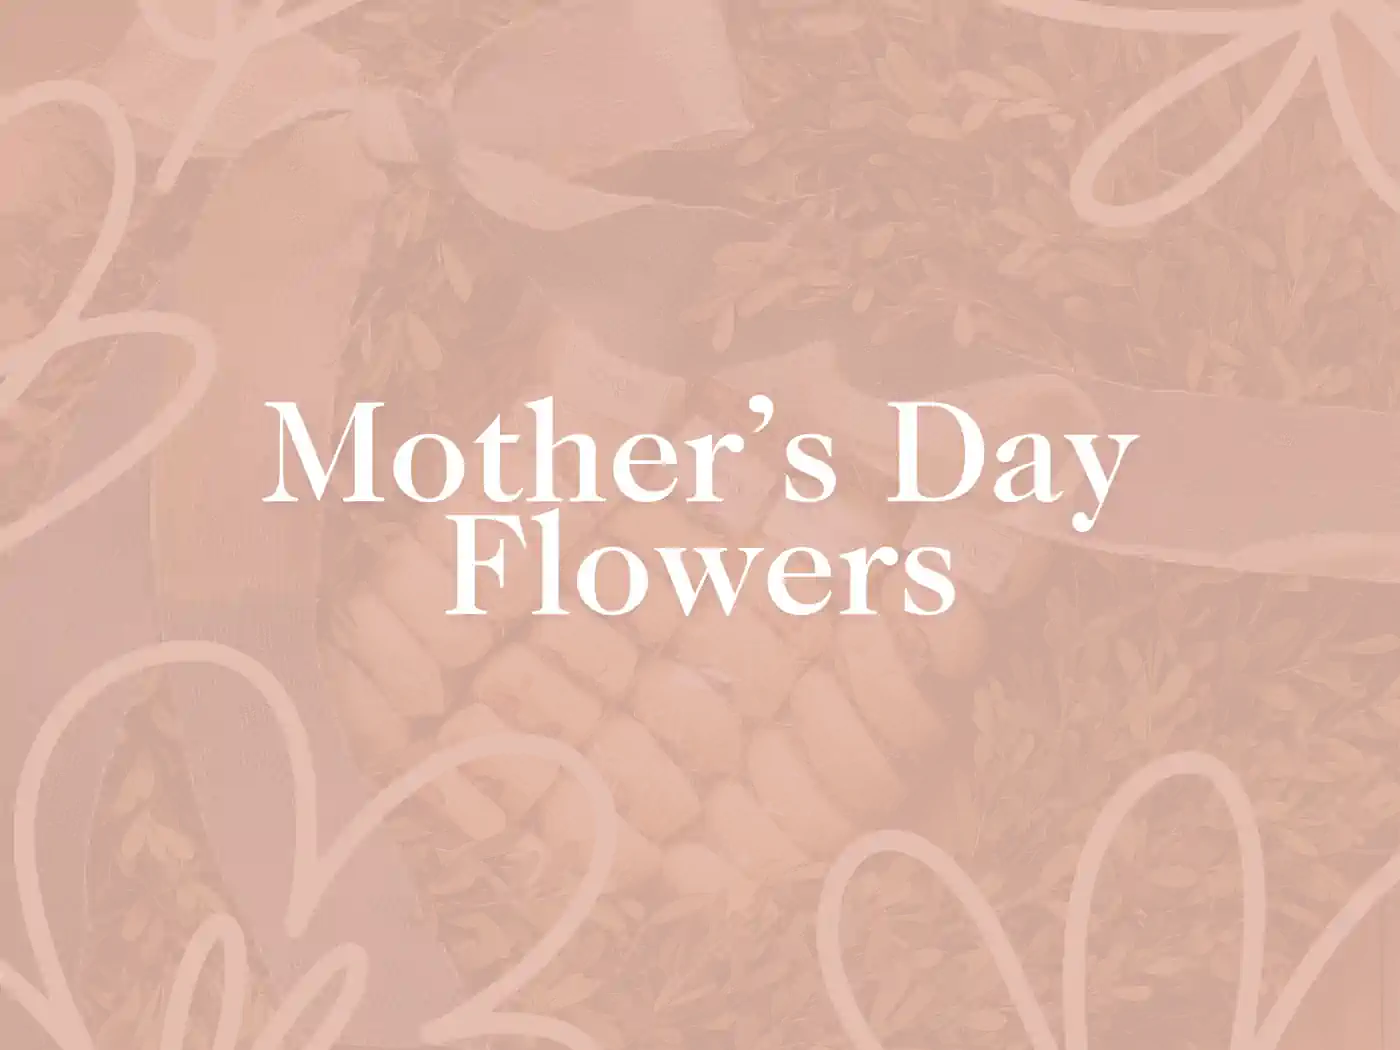 A beautiful bouquet of flowers with a soft pink ribbon, perfect for Mother's Day. Fabulous Flowers and Gifts. Mother's Day Flowers.